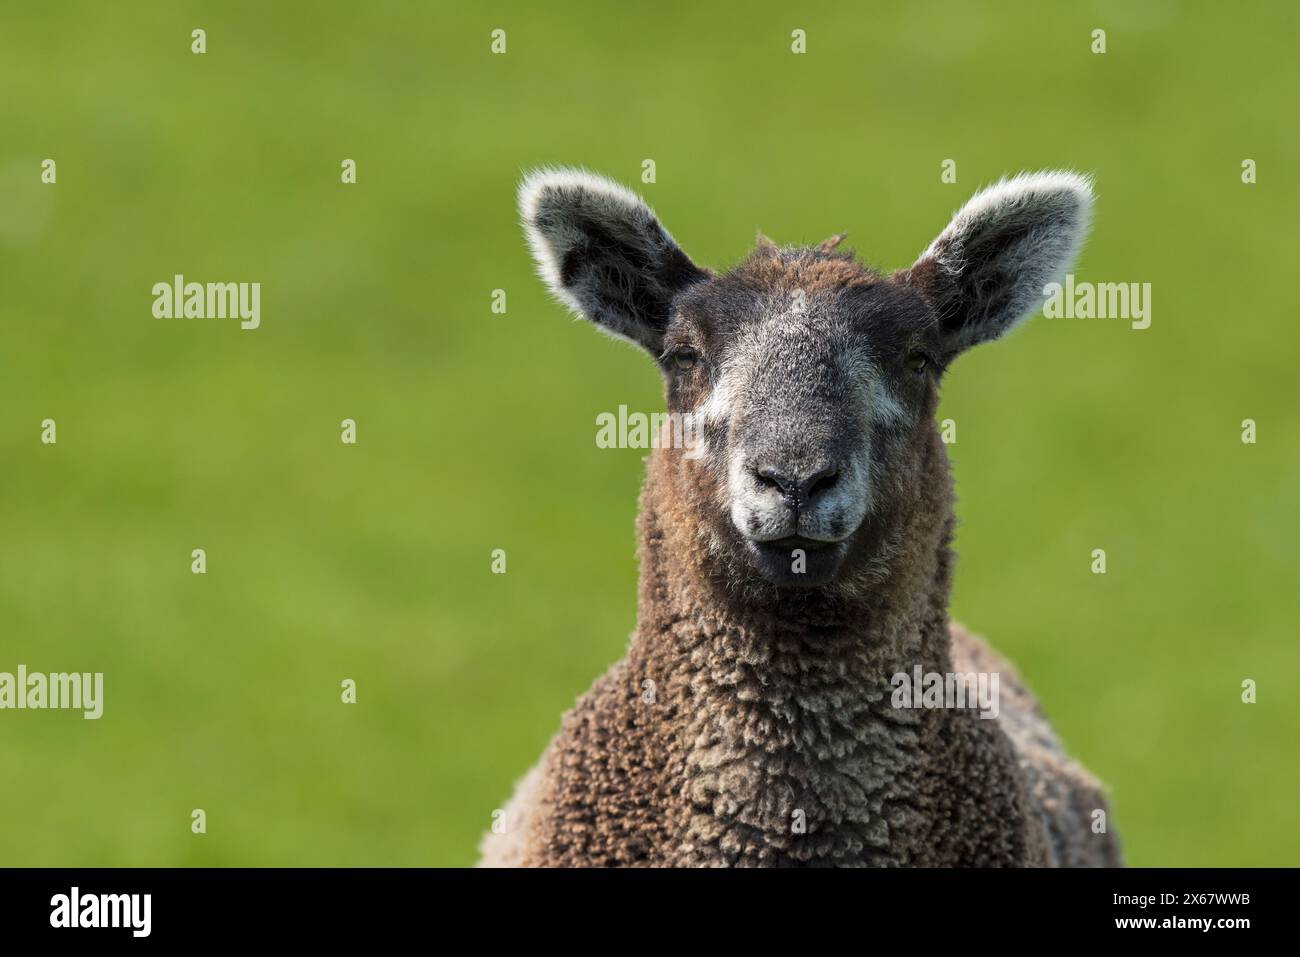 Sheep portrait, young sheep with light brown fur, Eiderstedt peninsula, Germany, Schleswig-Holstein, North Sea coast Stock Photo